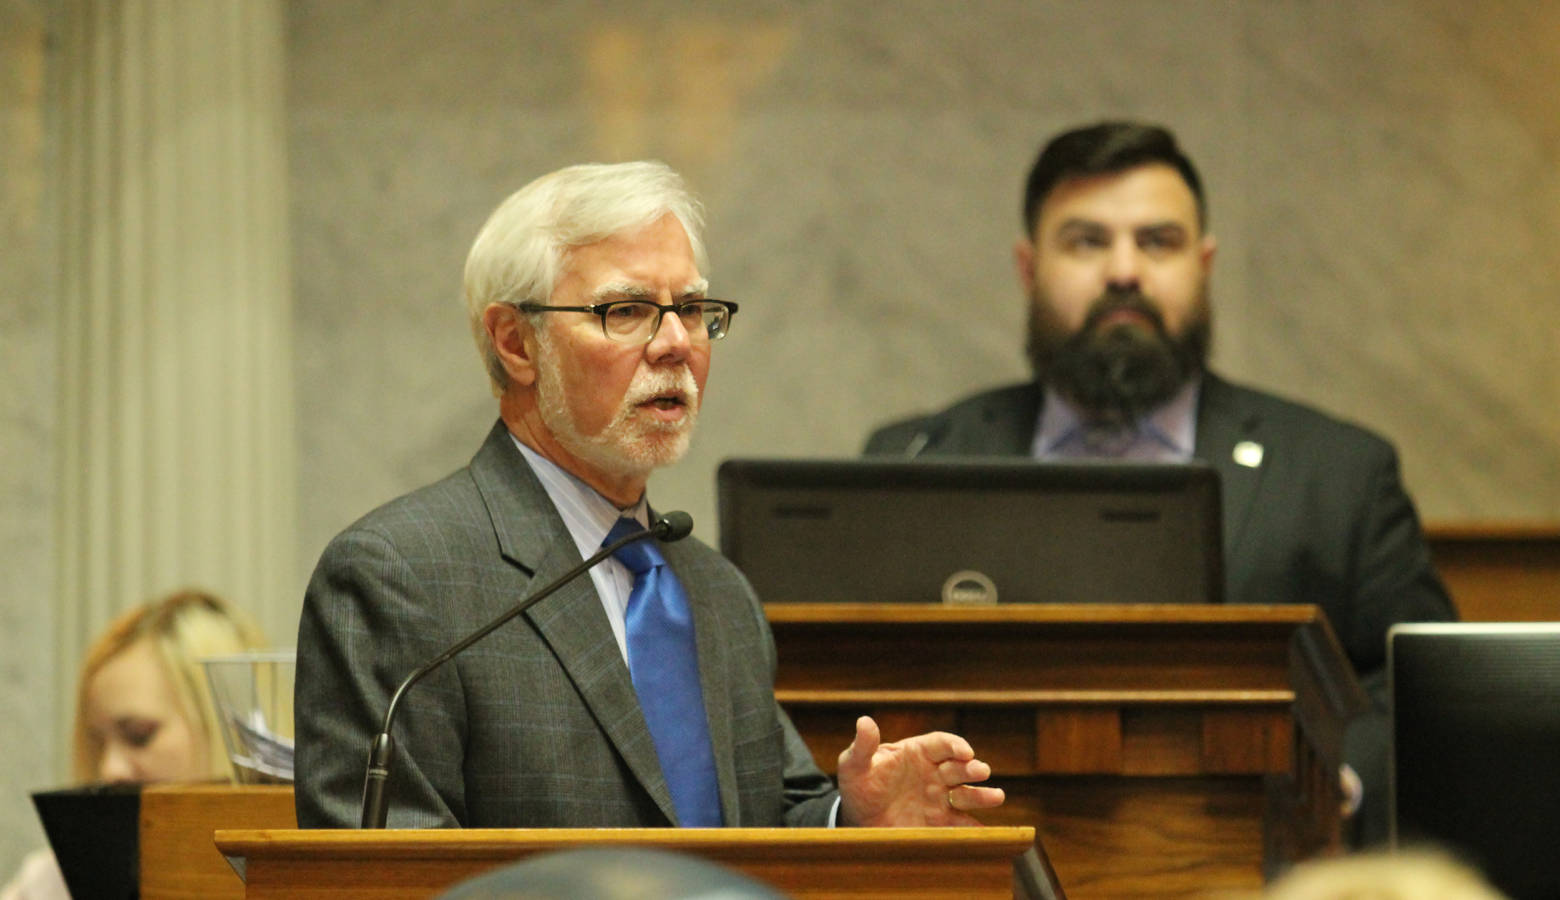 Sen. Tim Lanane (D-Anderson) says an independent commission would help take politics out of the redistricting process. (Lauren Chapman/IPB News)